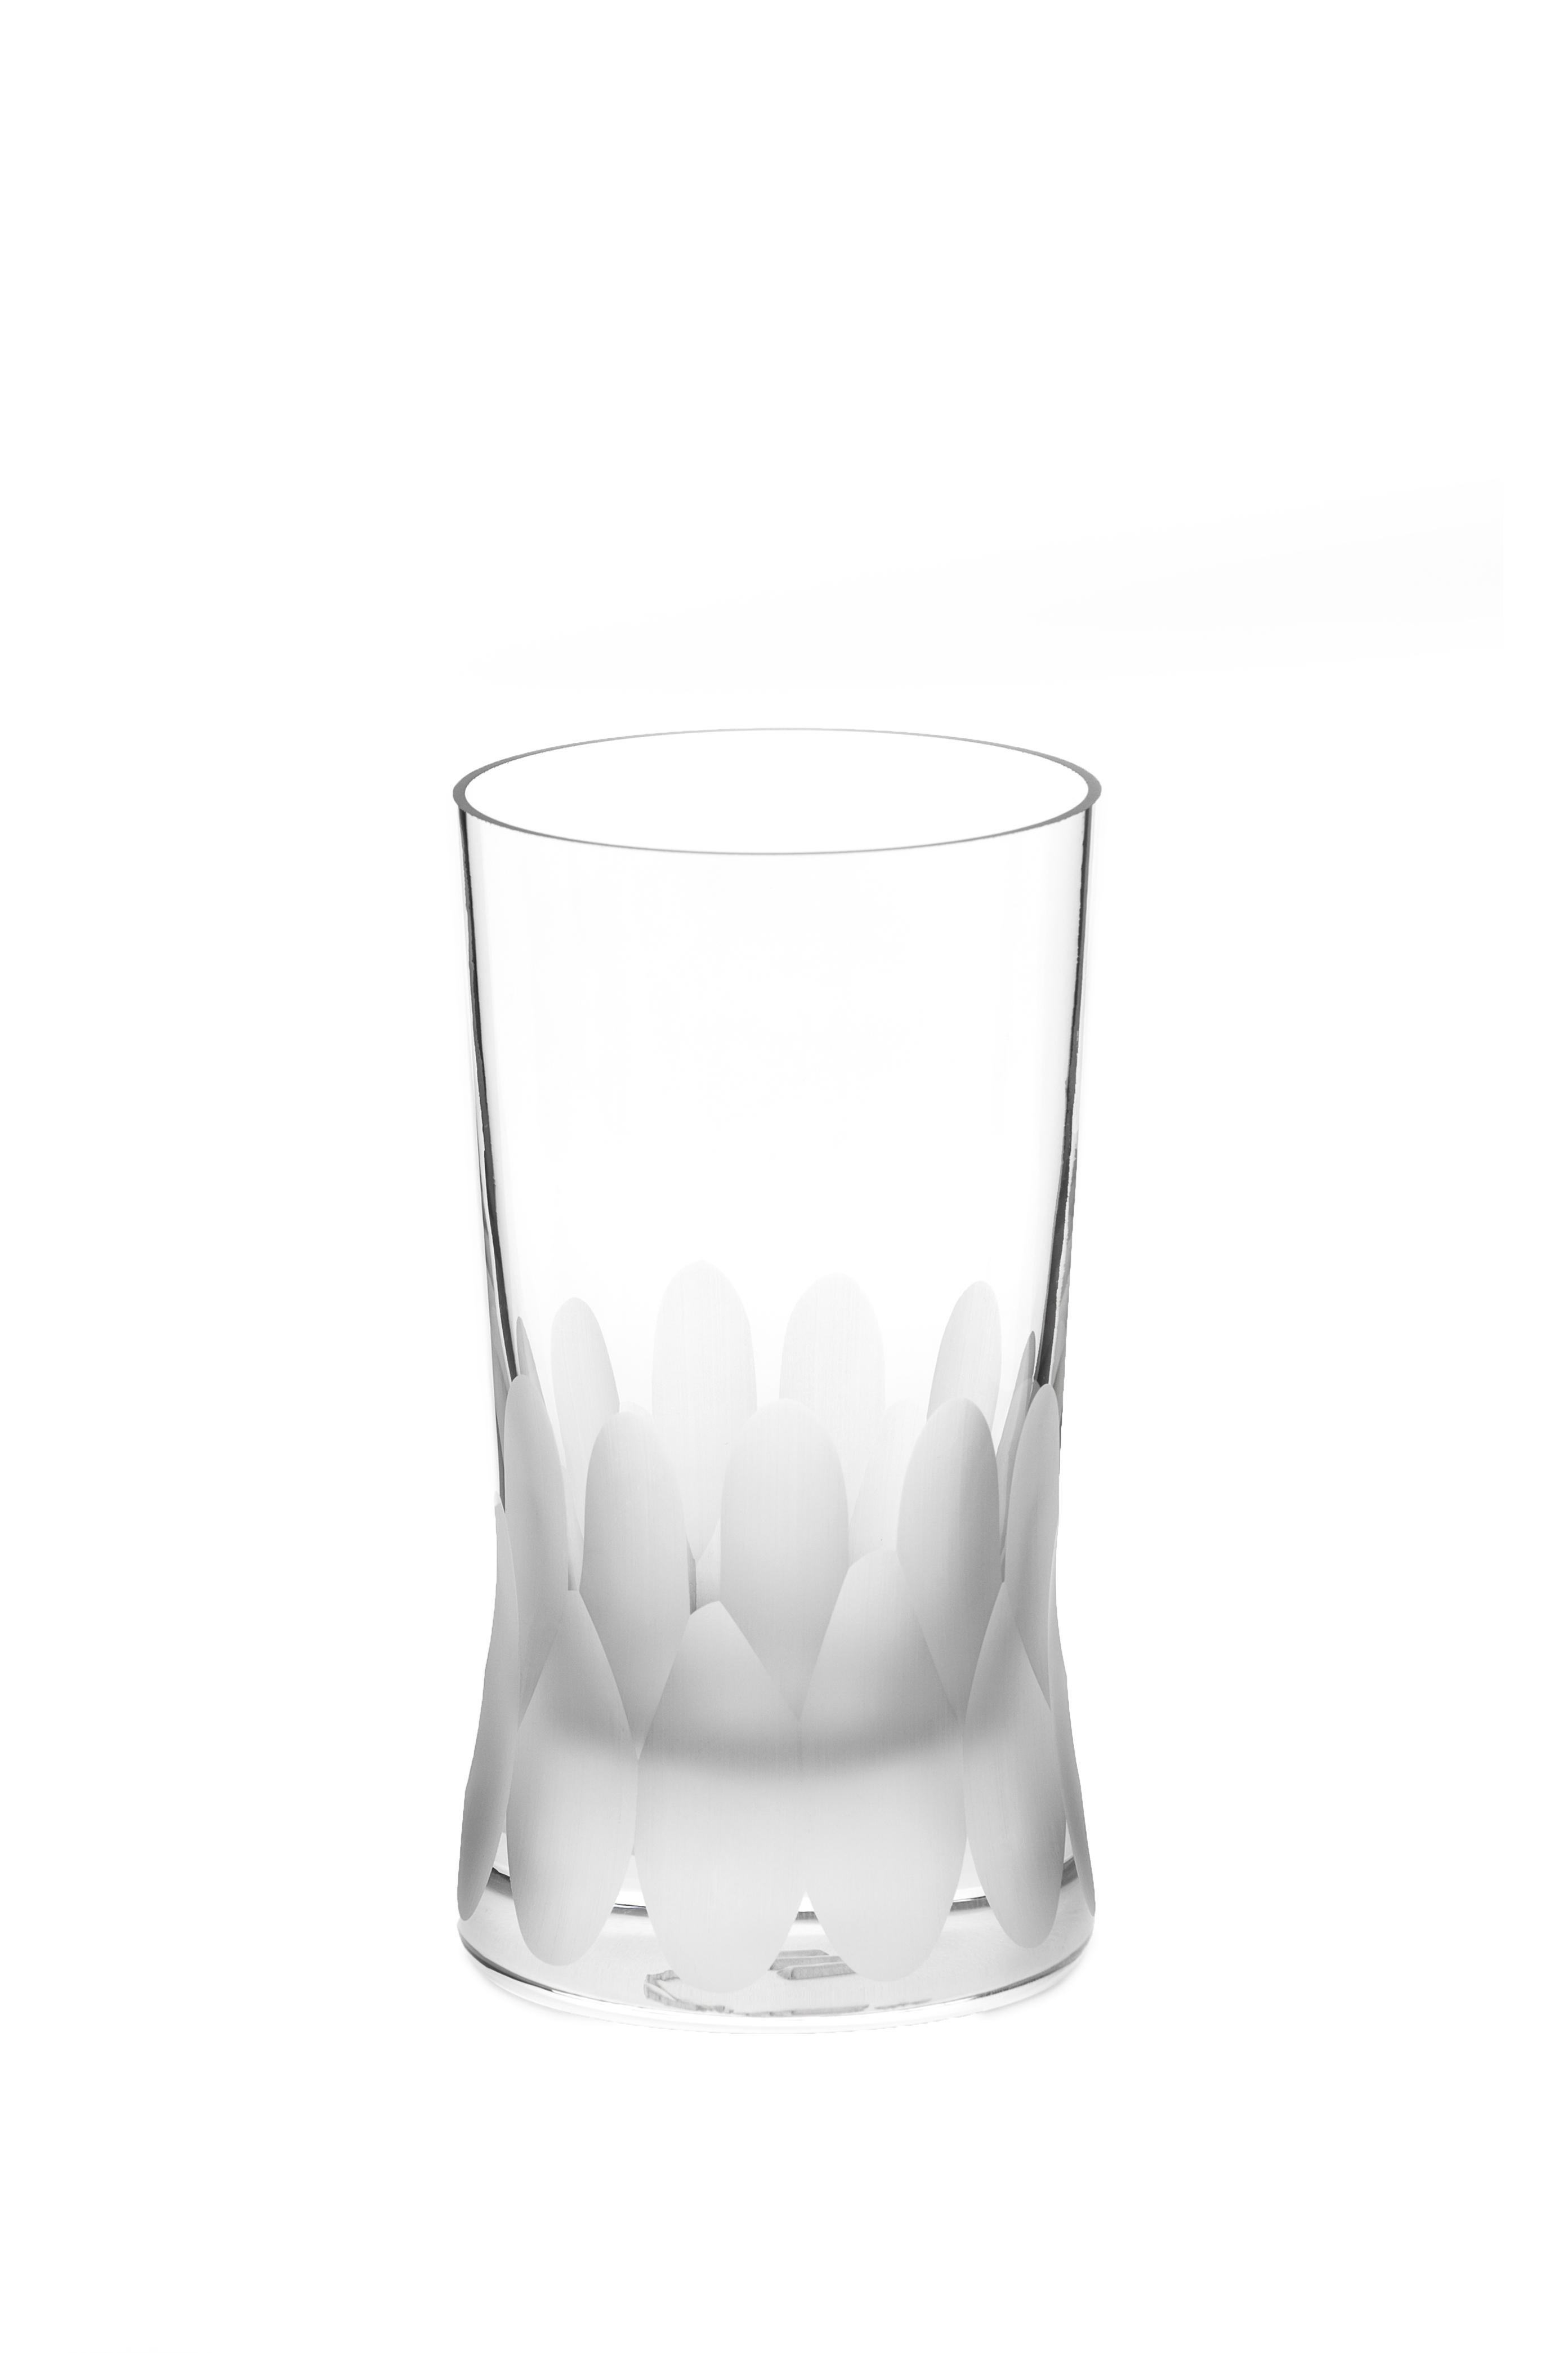 Hand-Crafted Martino Gamper Handmade Irish Crystal Large Tumbler Glass Cuttings Series CUT V For Sale